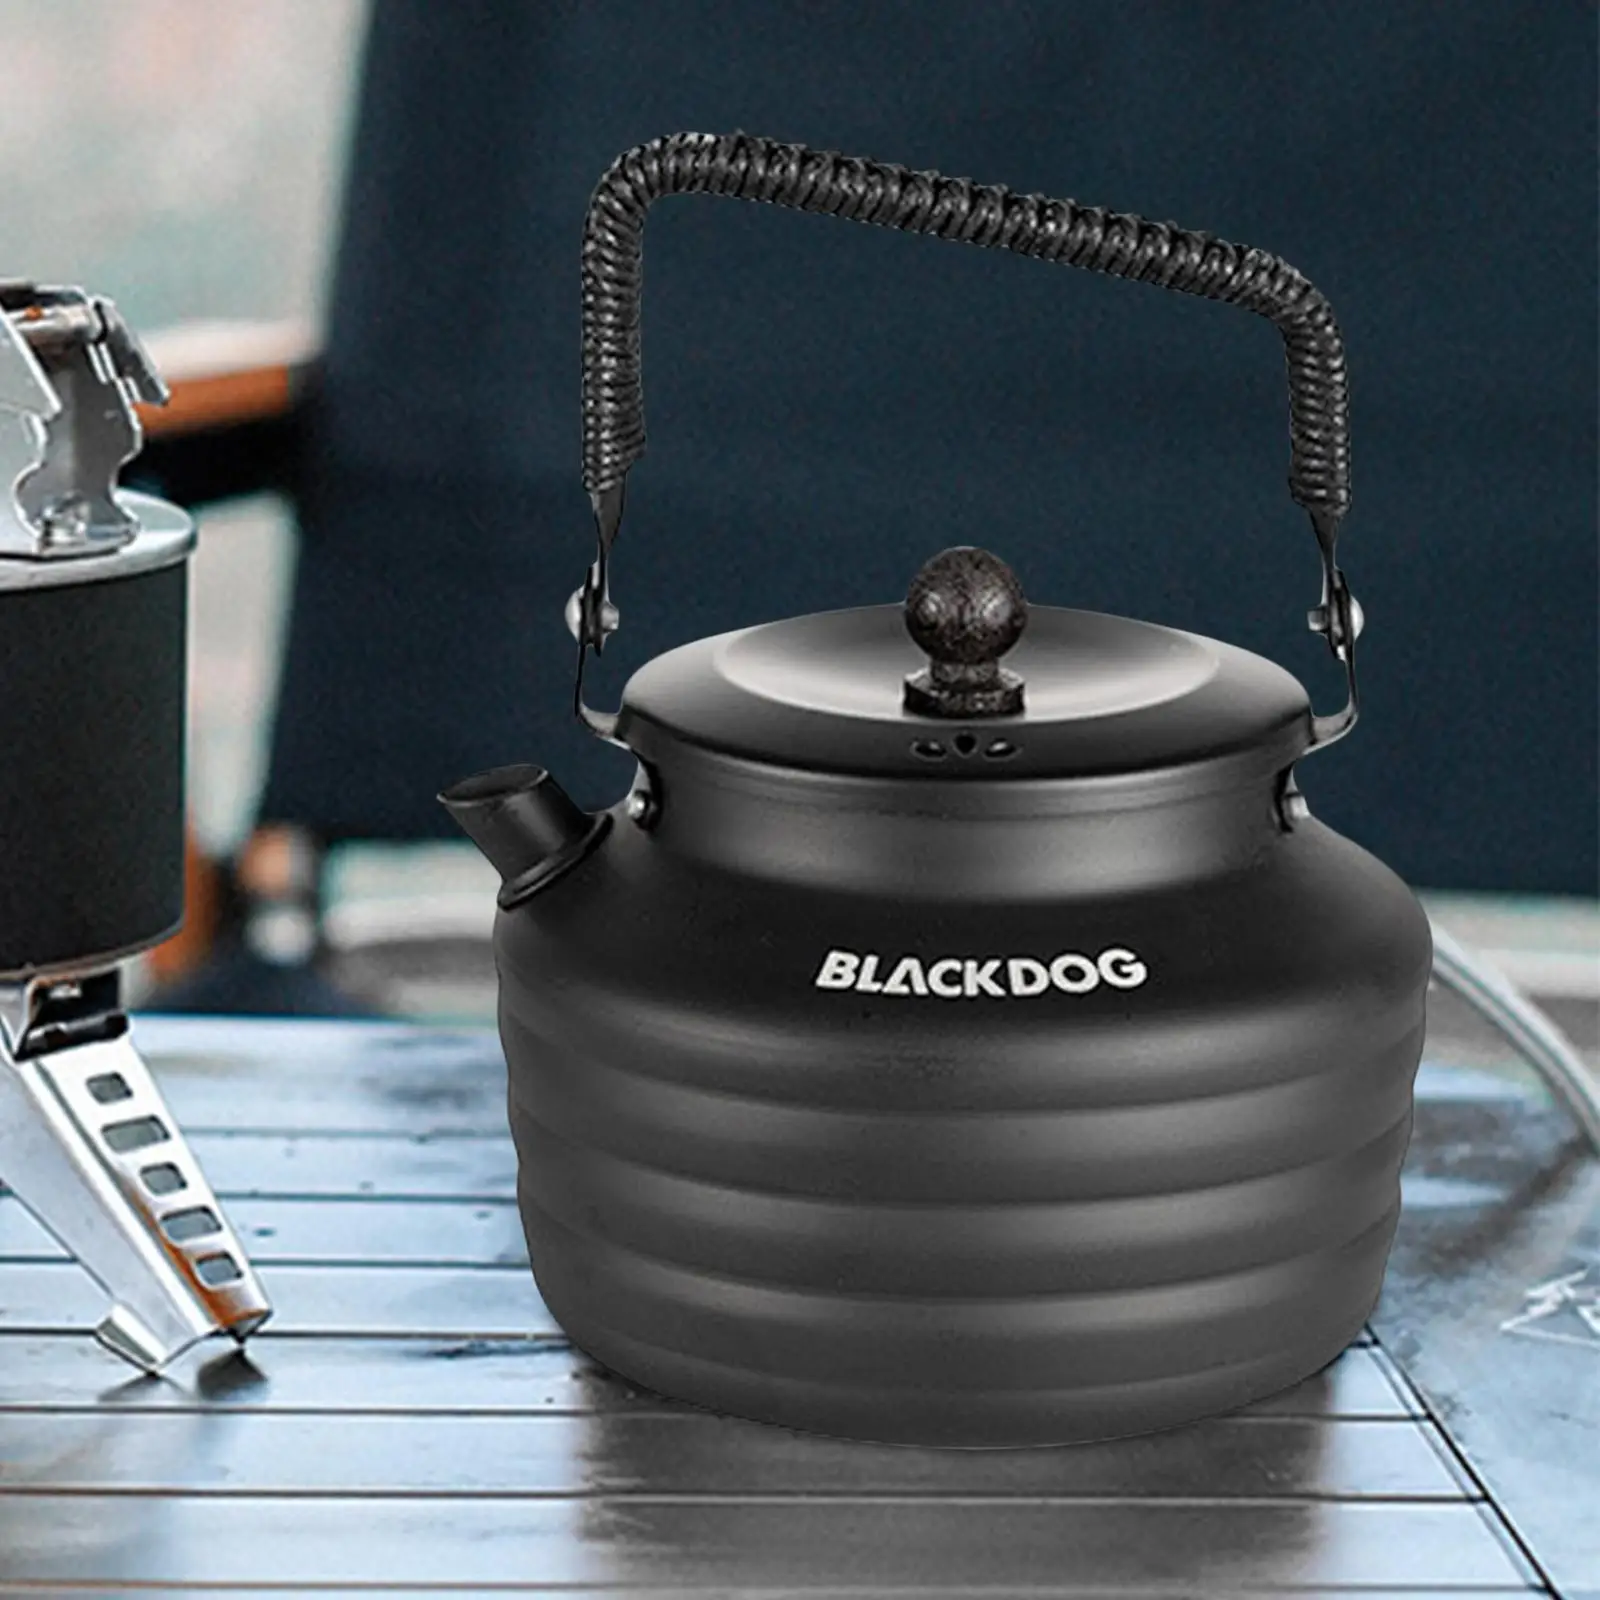 Compact Camping Kettle Teapot Aluminum Alloy Lightweight Black Cookware for Backpacking Outdoor Hiking Picnic Travel